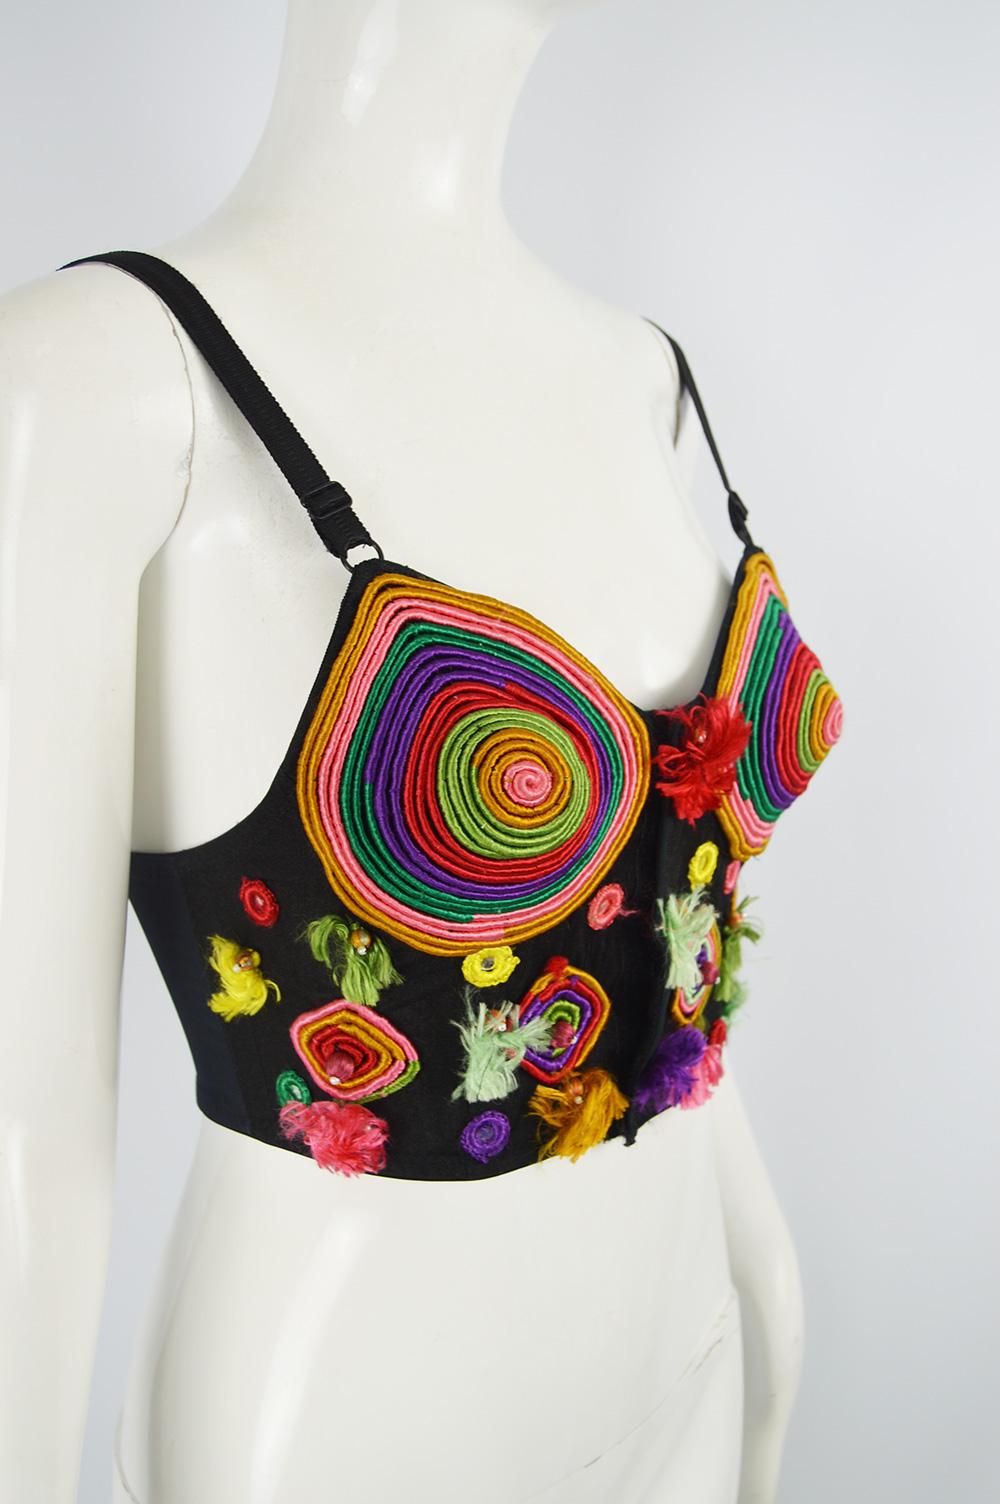 Women's Hunza Vintage Cone Bra Bustier Top Embellished with Mirrorwork & Appliqués For Sale